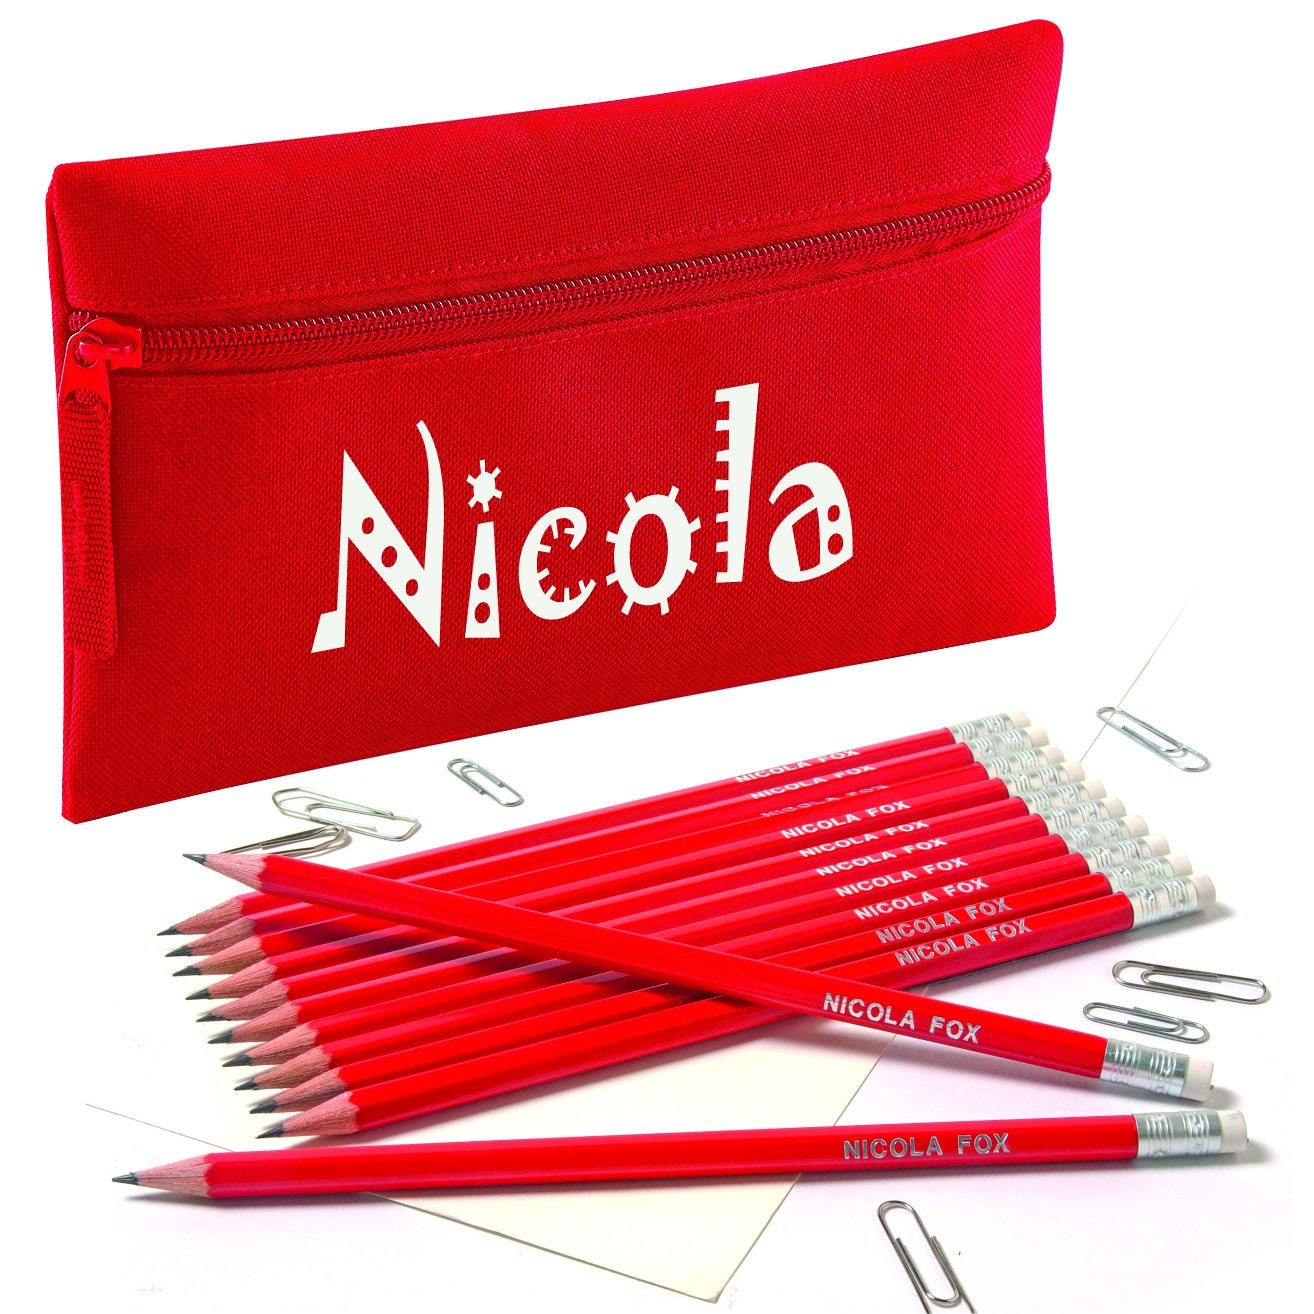 12 Red HB Pencils Personalised with Name High Quality Printed/Embossed Pencils 